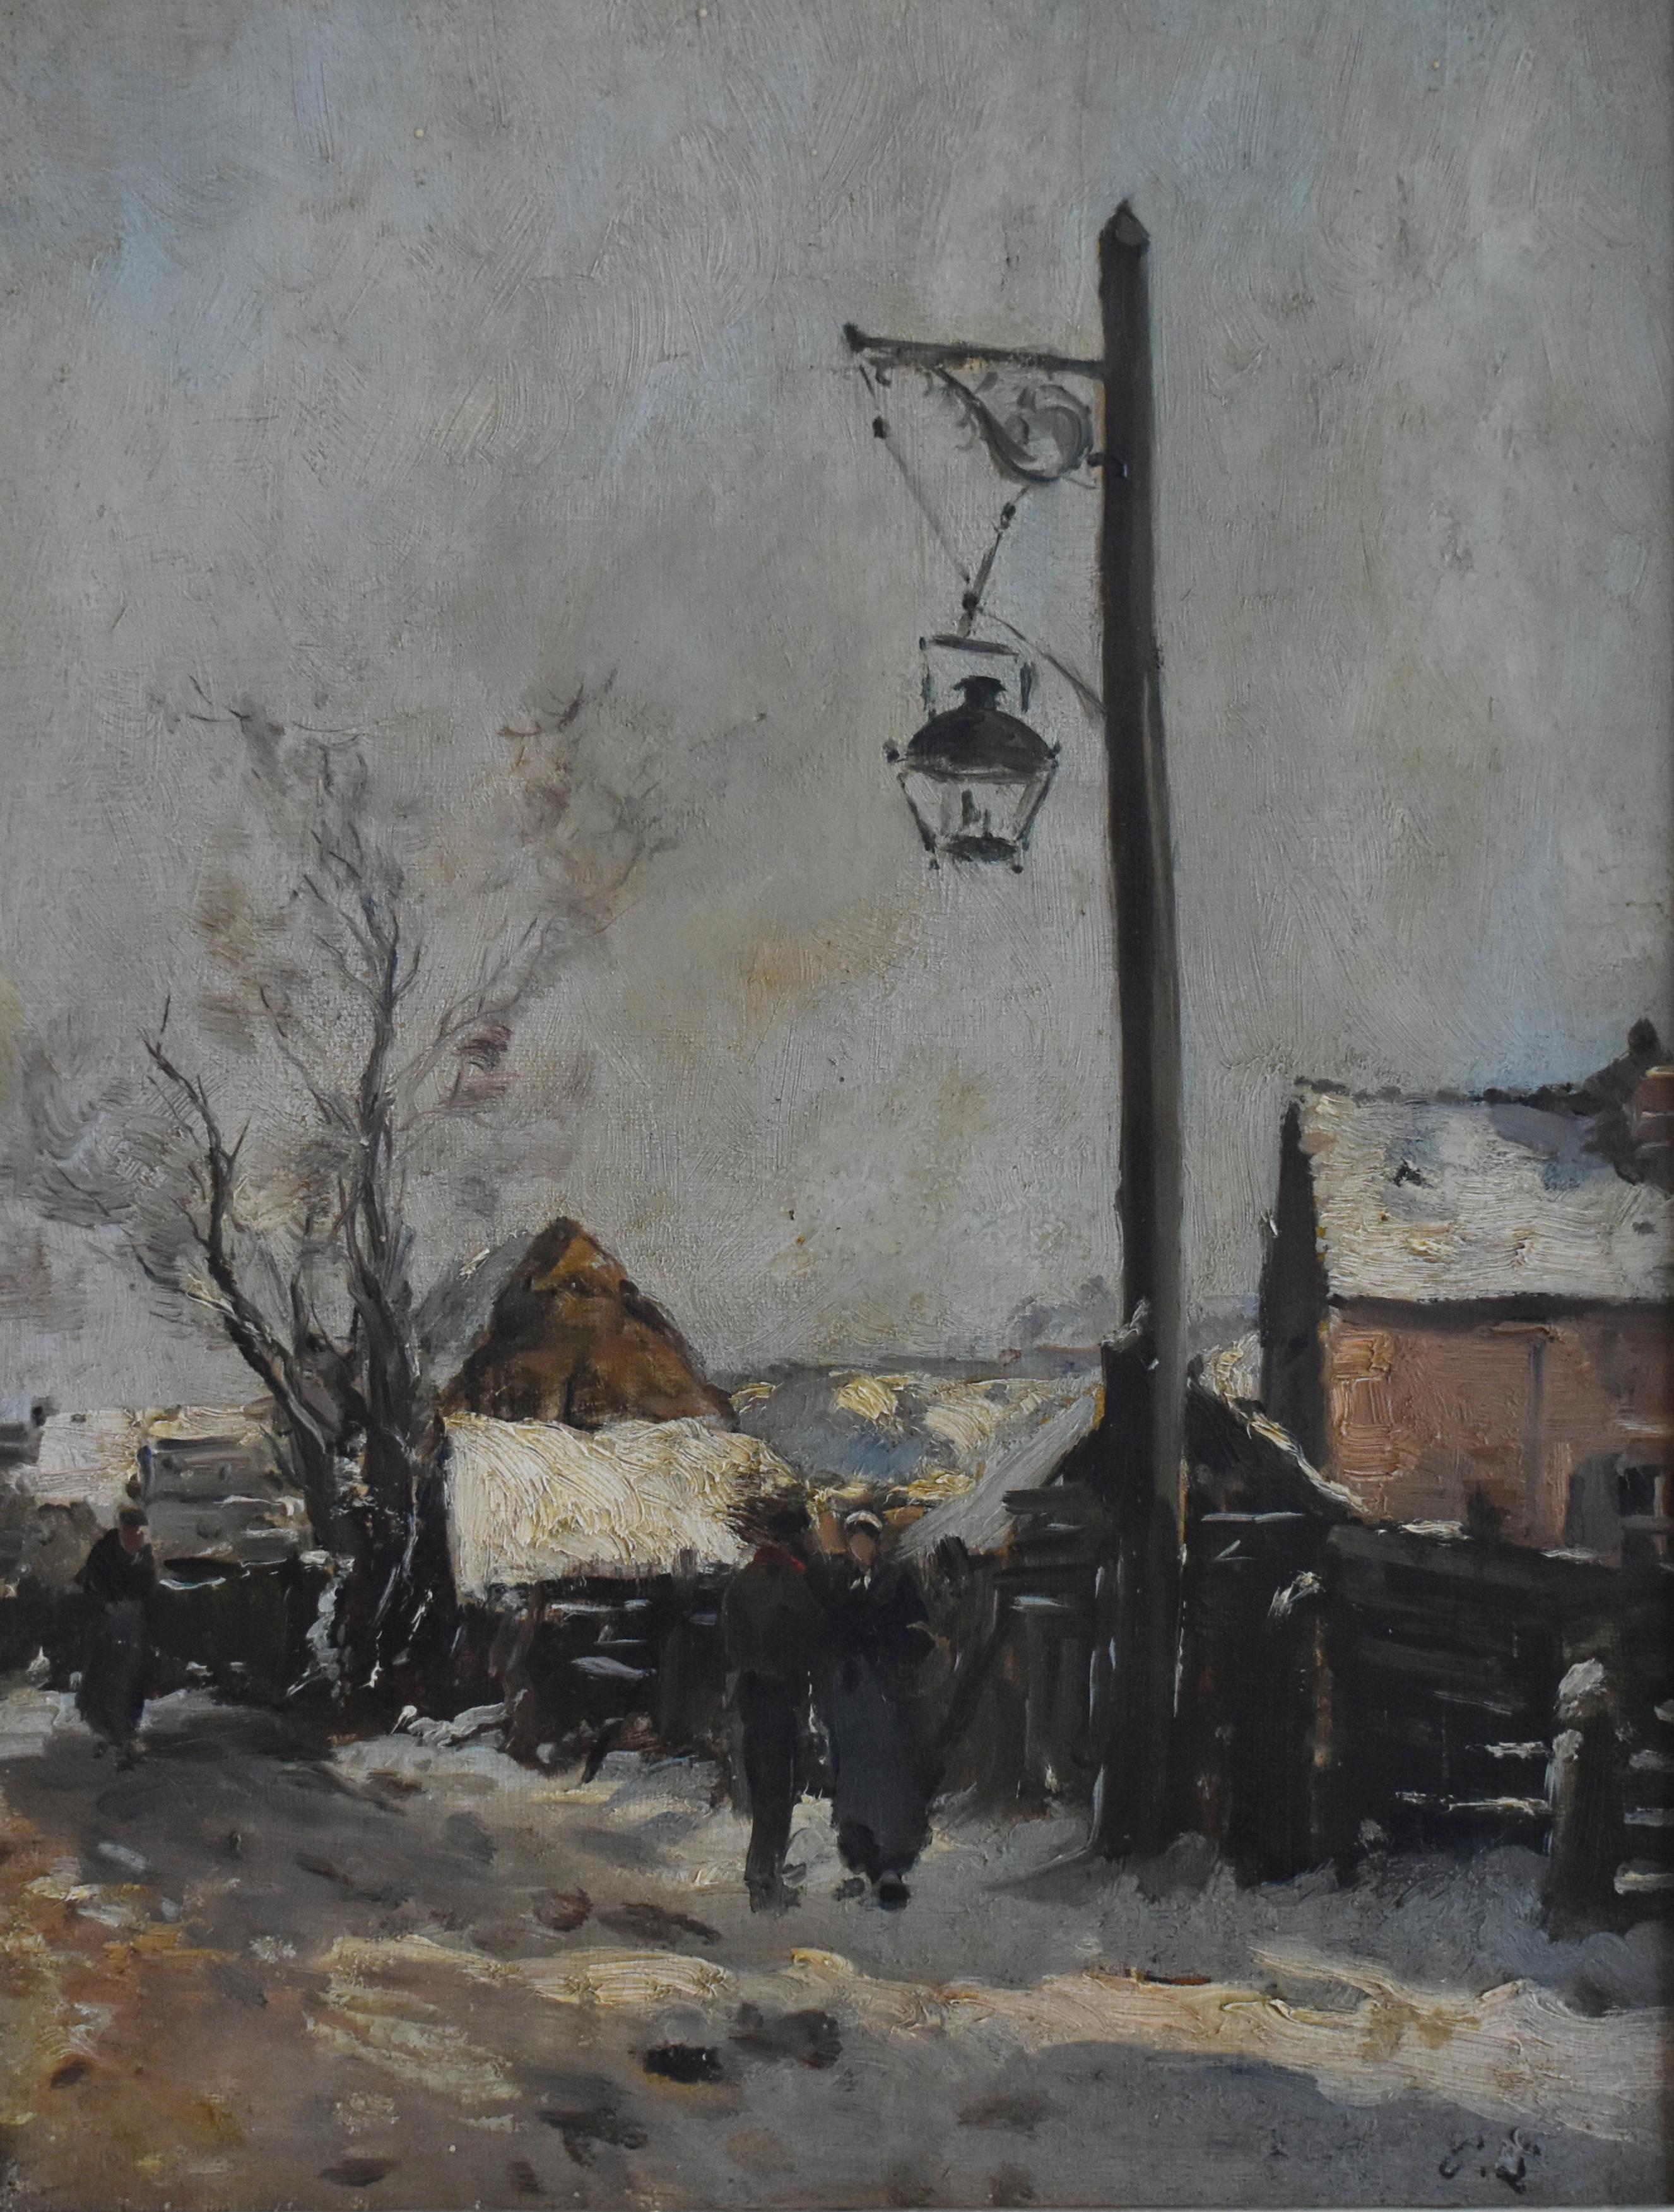 Paul LECOMTE (1842-1920) French School 
Outside the Village

A desolate snow covered landscape with two figures huddled by the village lantern. The lantern was used to guide weary travellers between remote locations before the invention of satnav. 